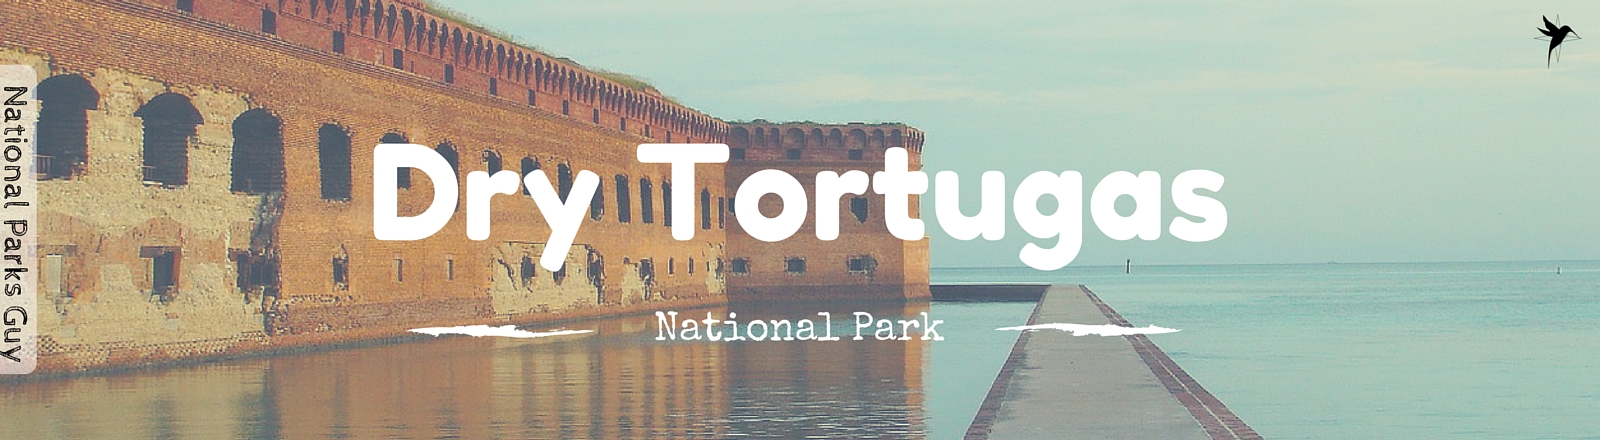 Dry Tortugas National Park, USA, National Parks Guy, Stories, Tales, Adventures, Wildlife